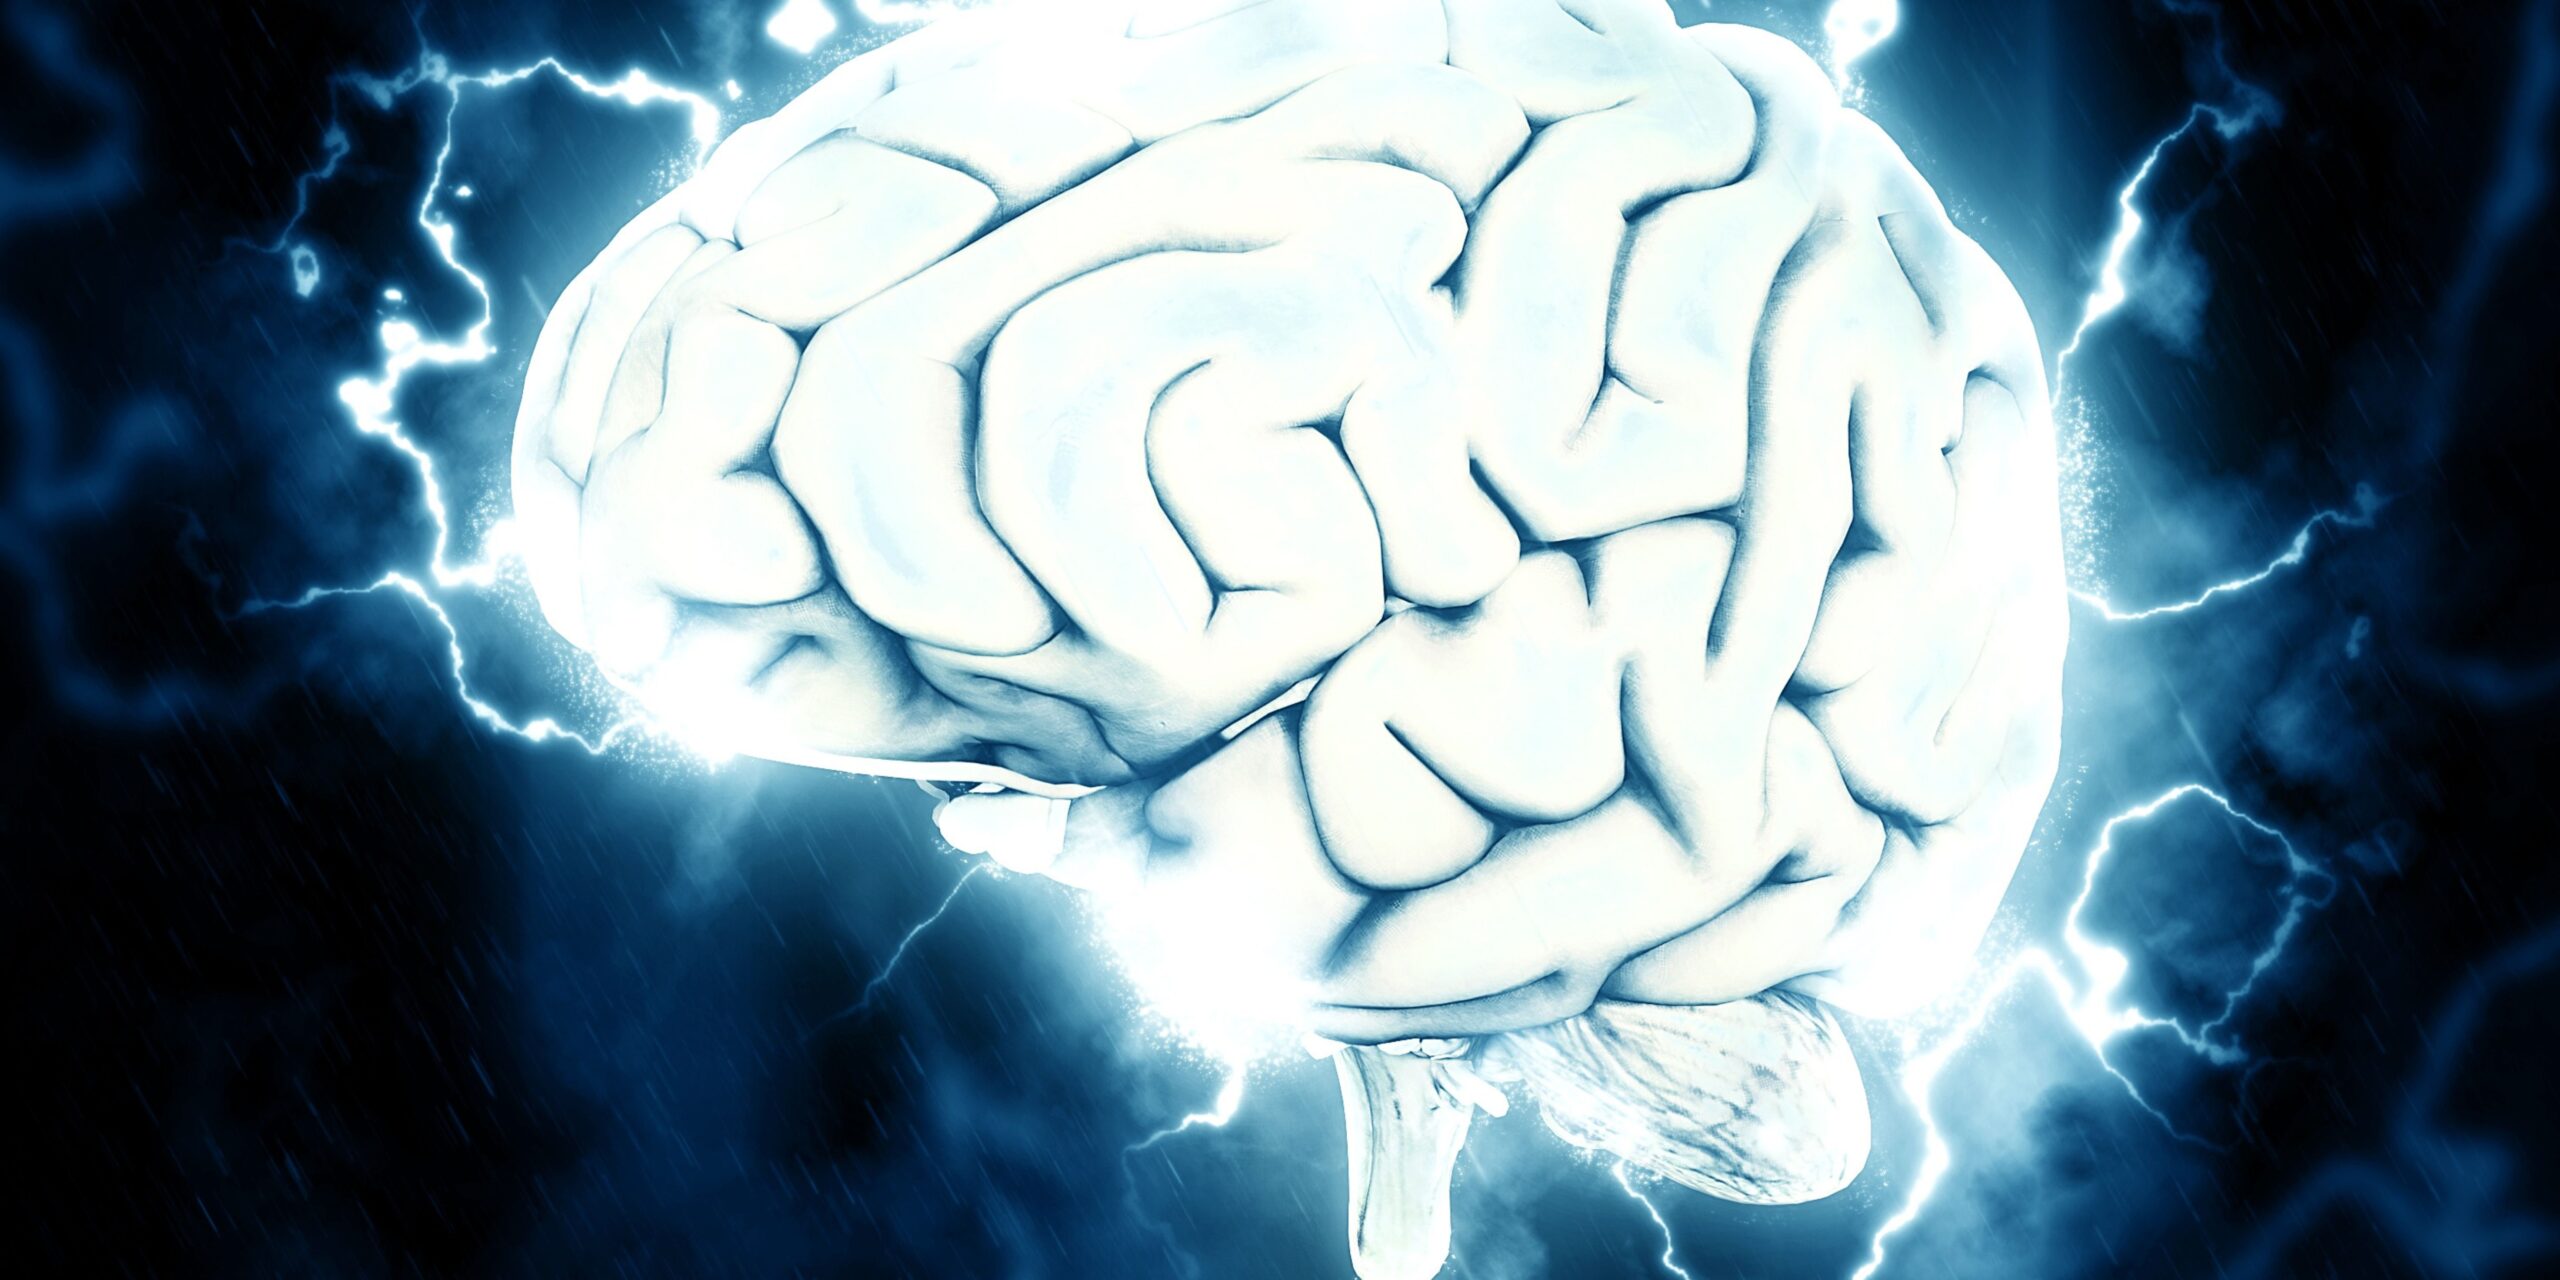 Mind Control for Recovery? Brain Implants Rekindle Hope for Lost Abilities After Severe Injury